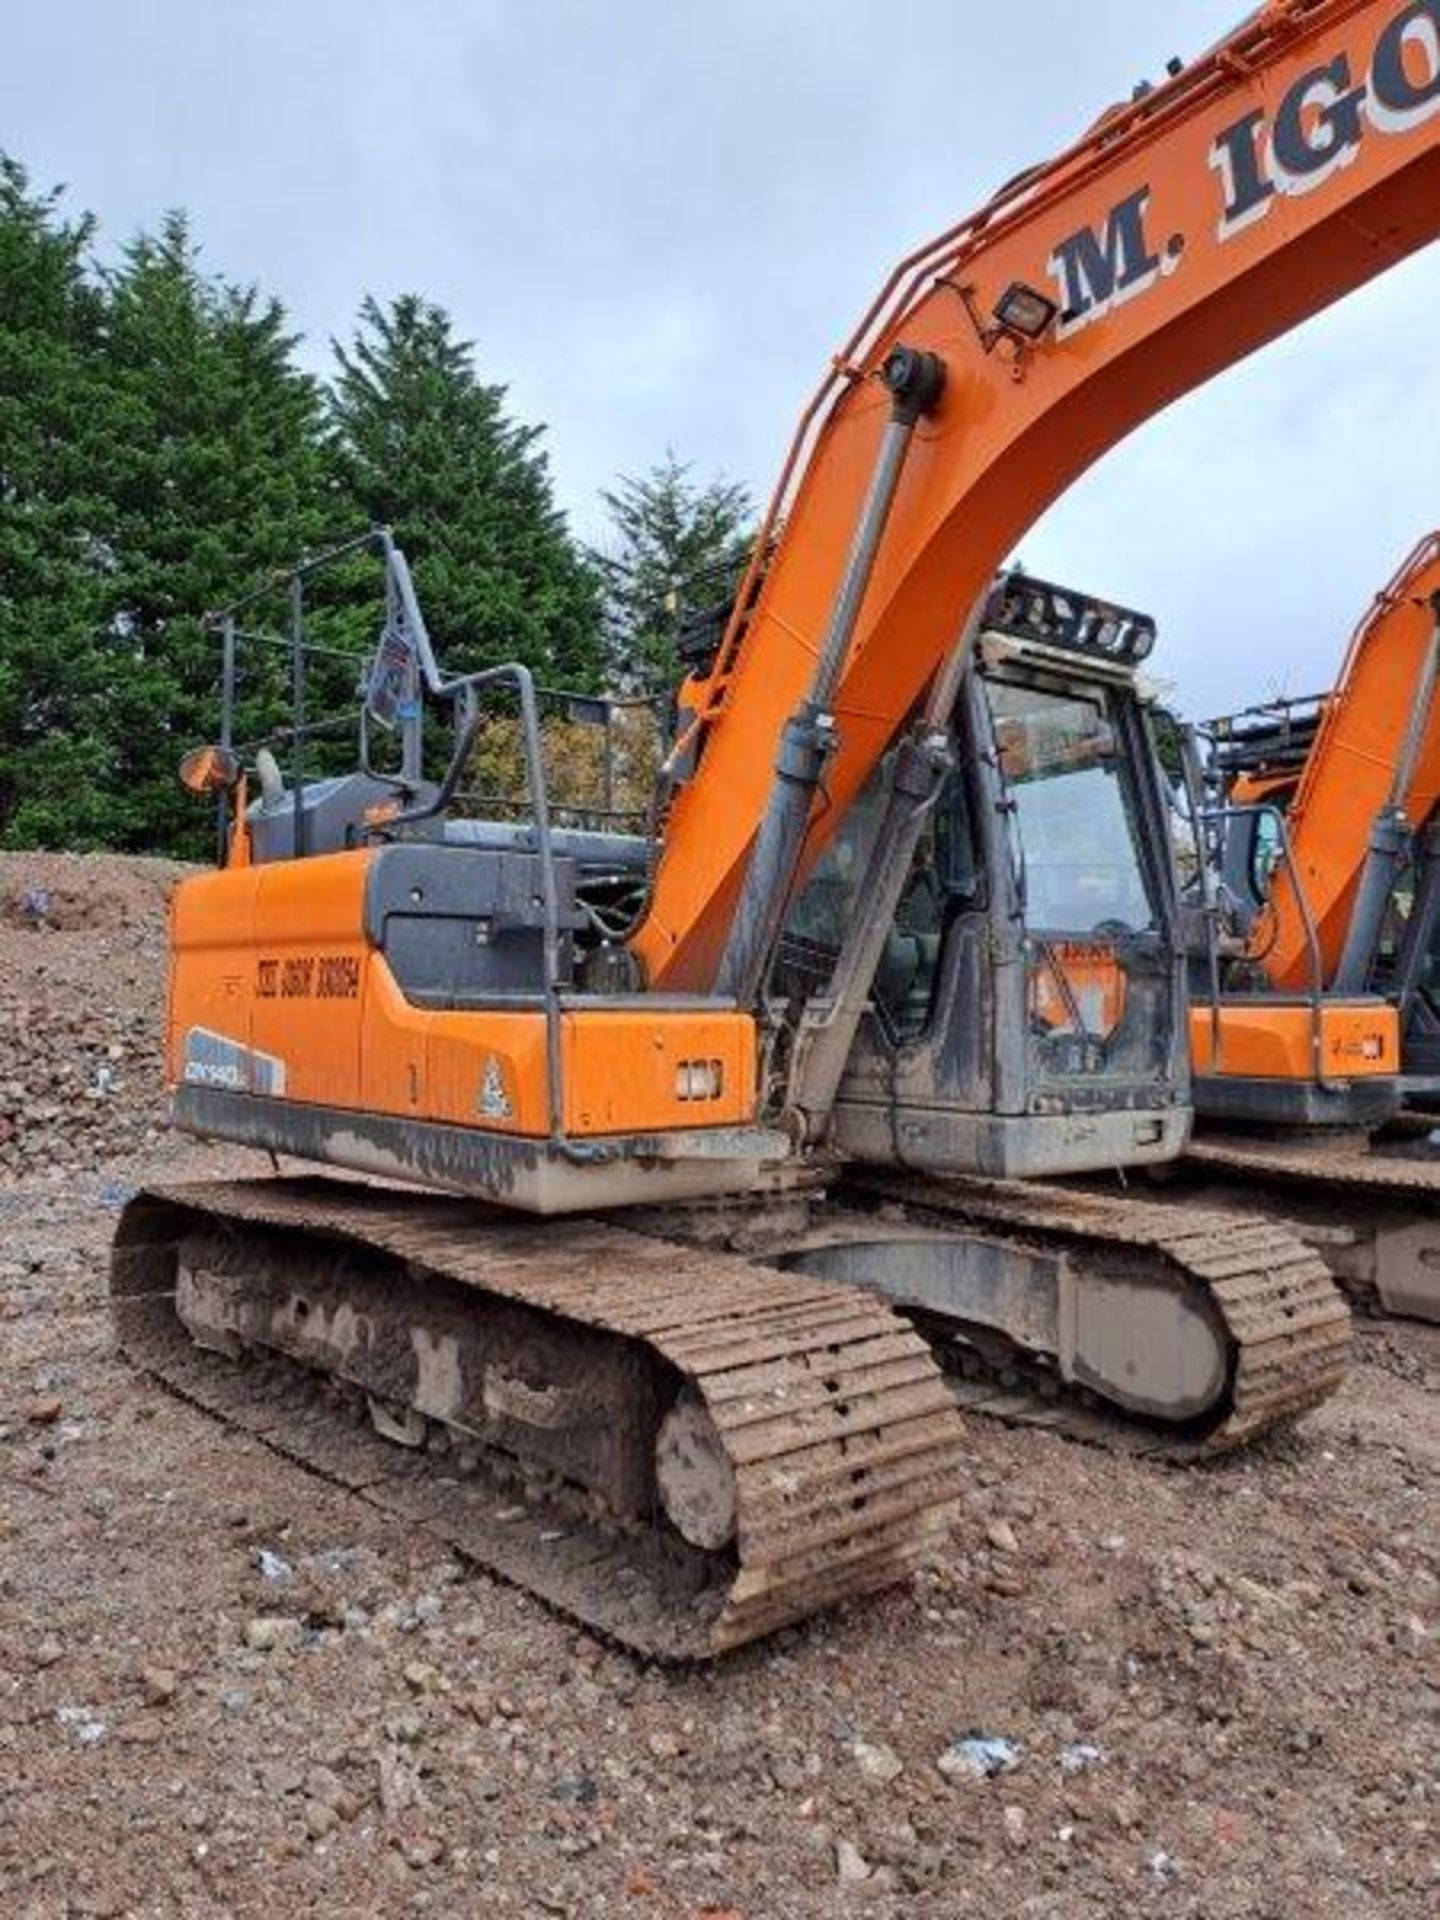 Doosan DX140LC-5 14t excavator, serial no. DHKCEBBRCH0001494, Year: 2017, Hours: 7,418, Key: 1, with - Image 9 of 18